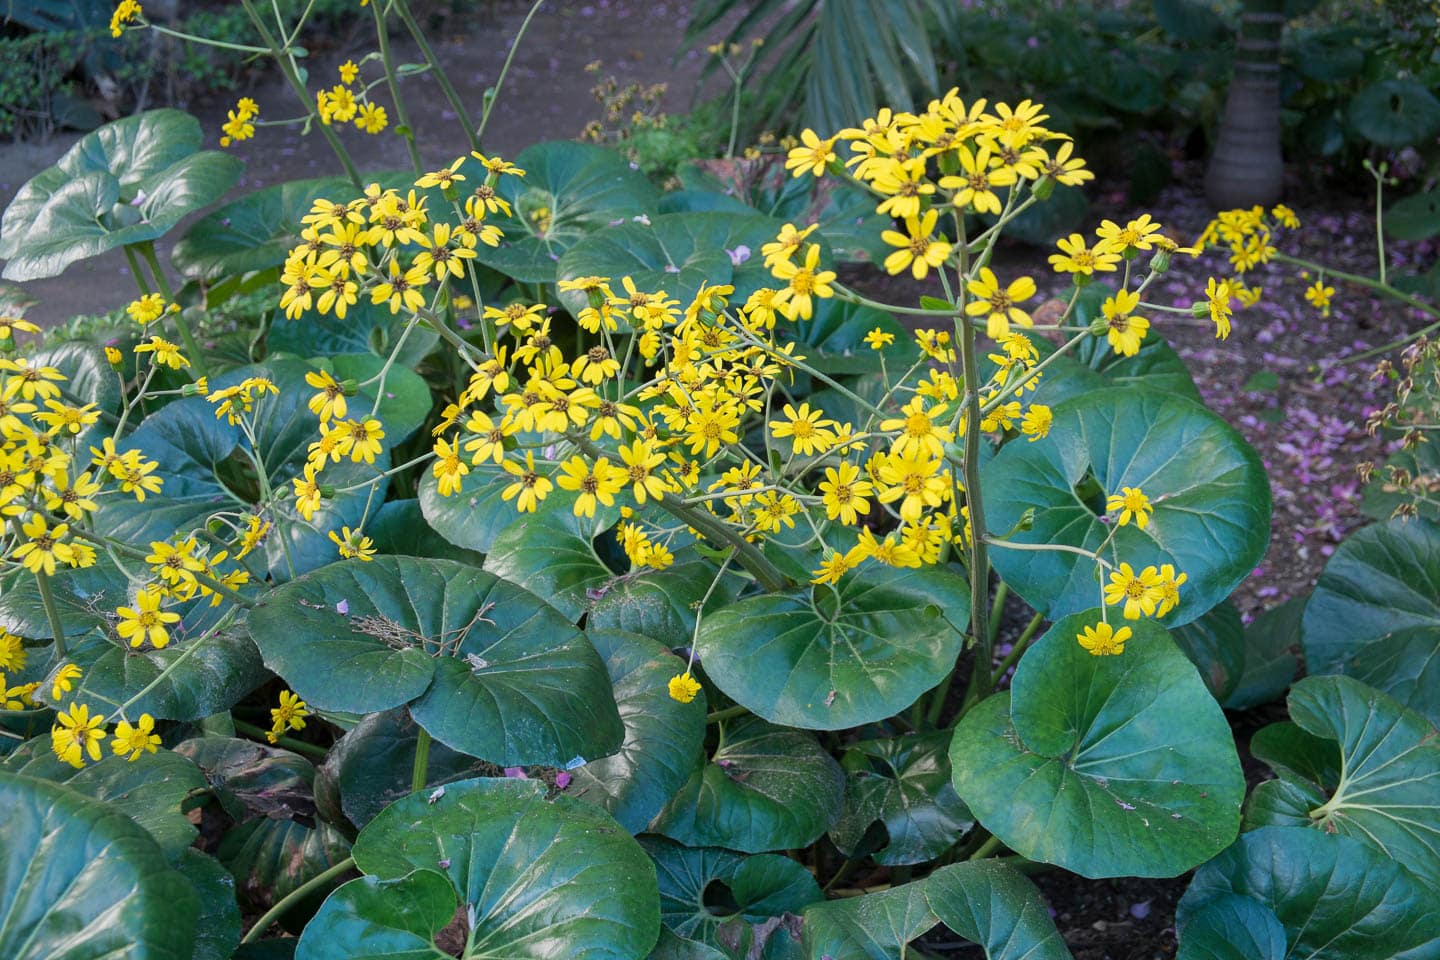 Farfugium Japonicum with large evergreen leaves and yellow flowers